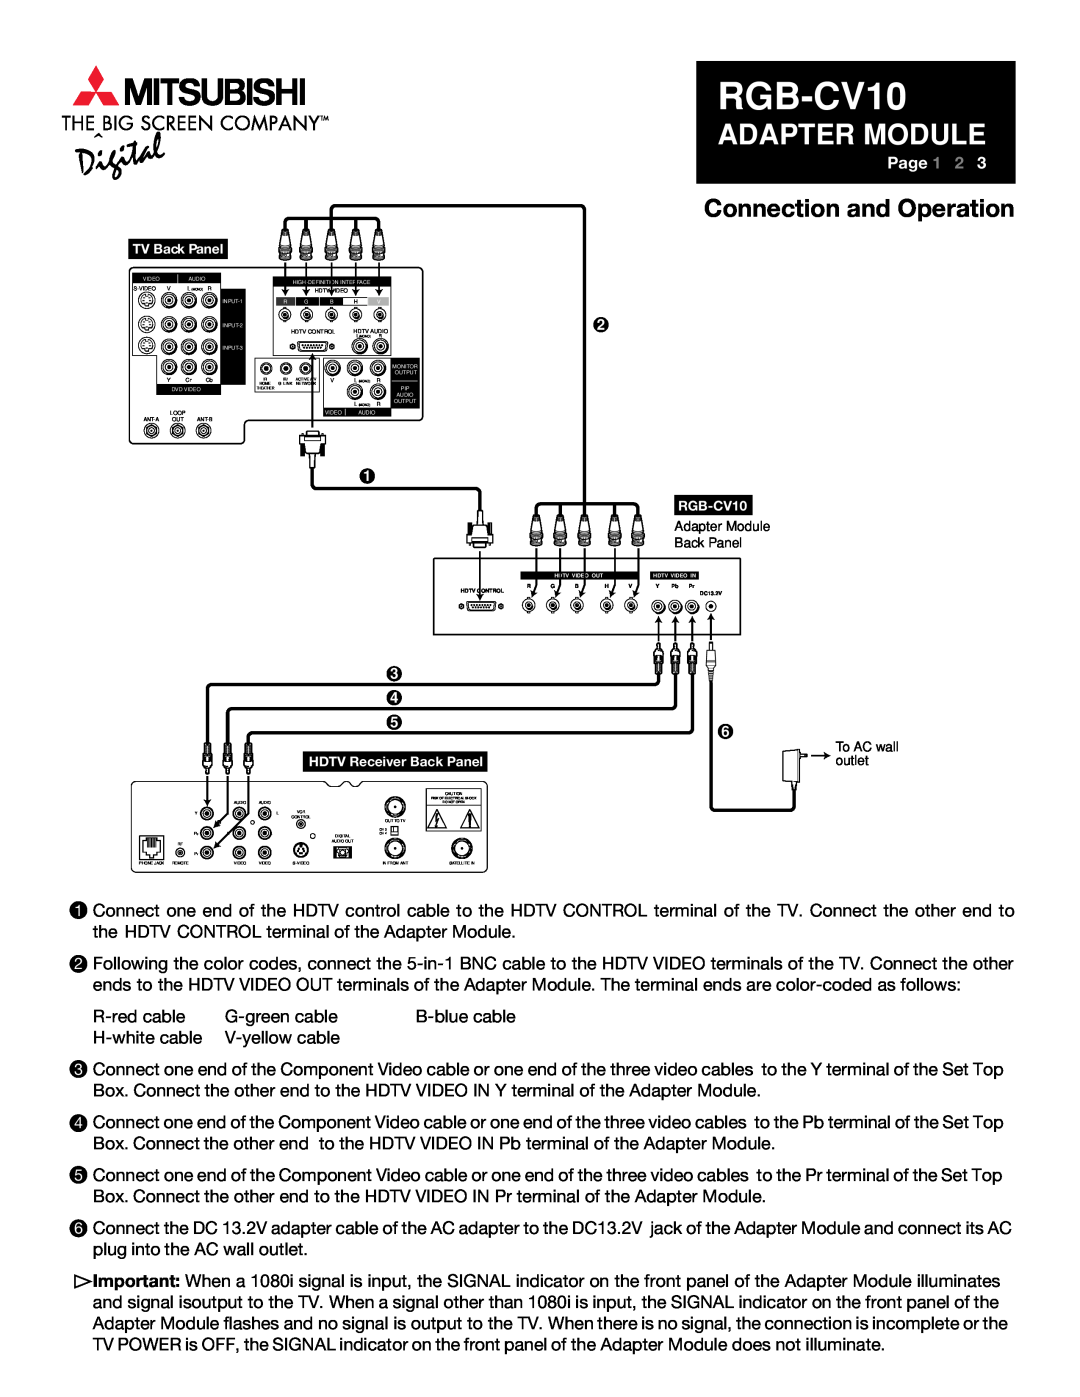 Mitsubishi Electronics RGB-CV10 specifications Adapter Module, Connection and Operation 